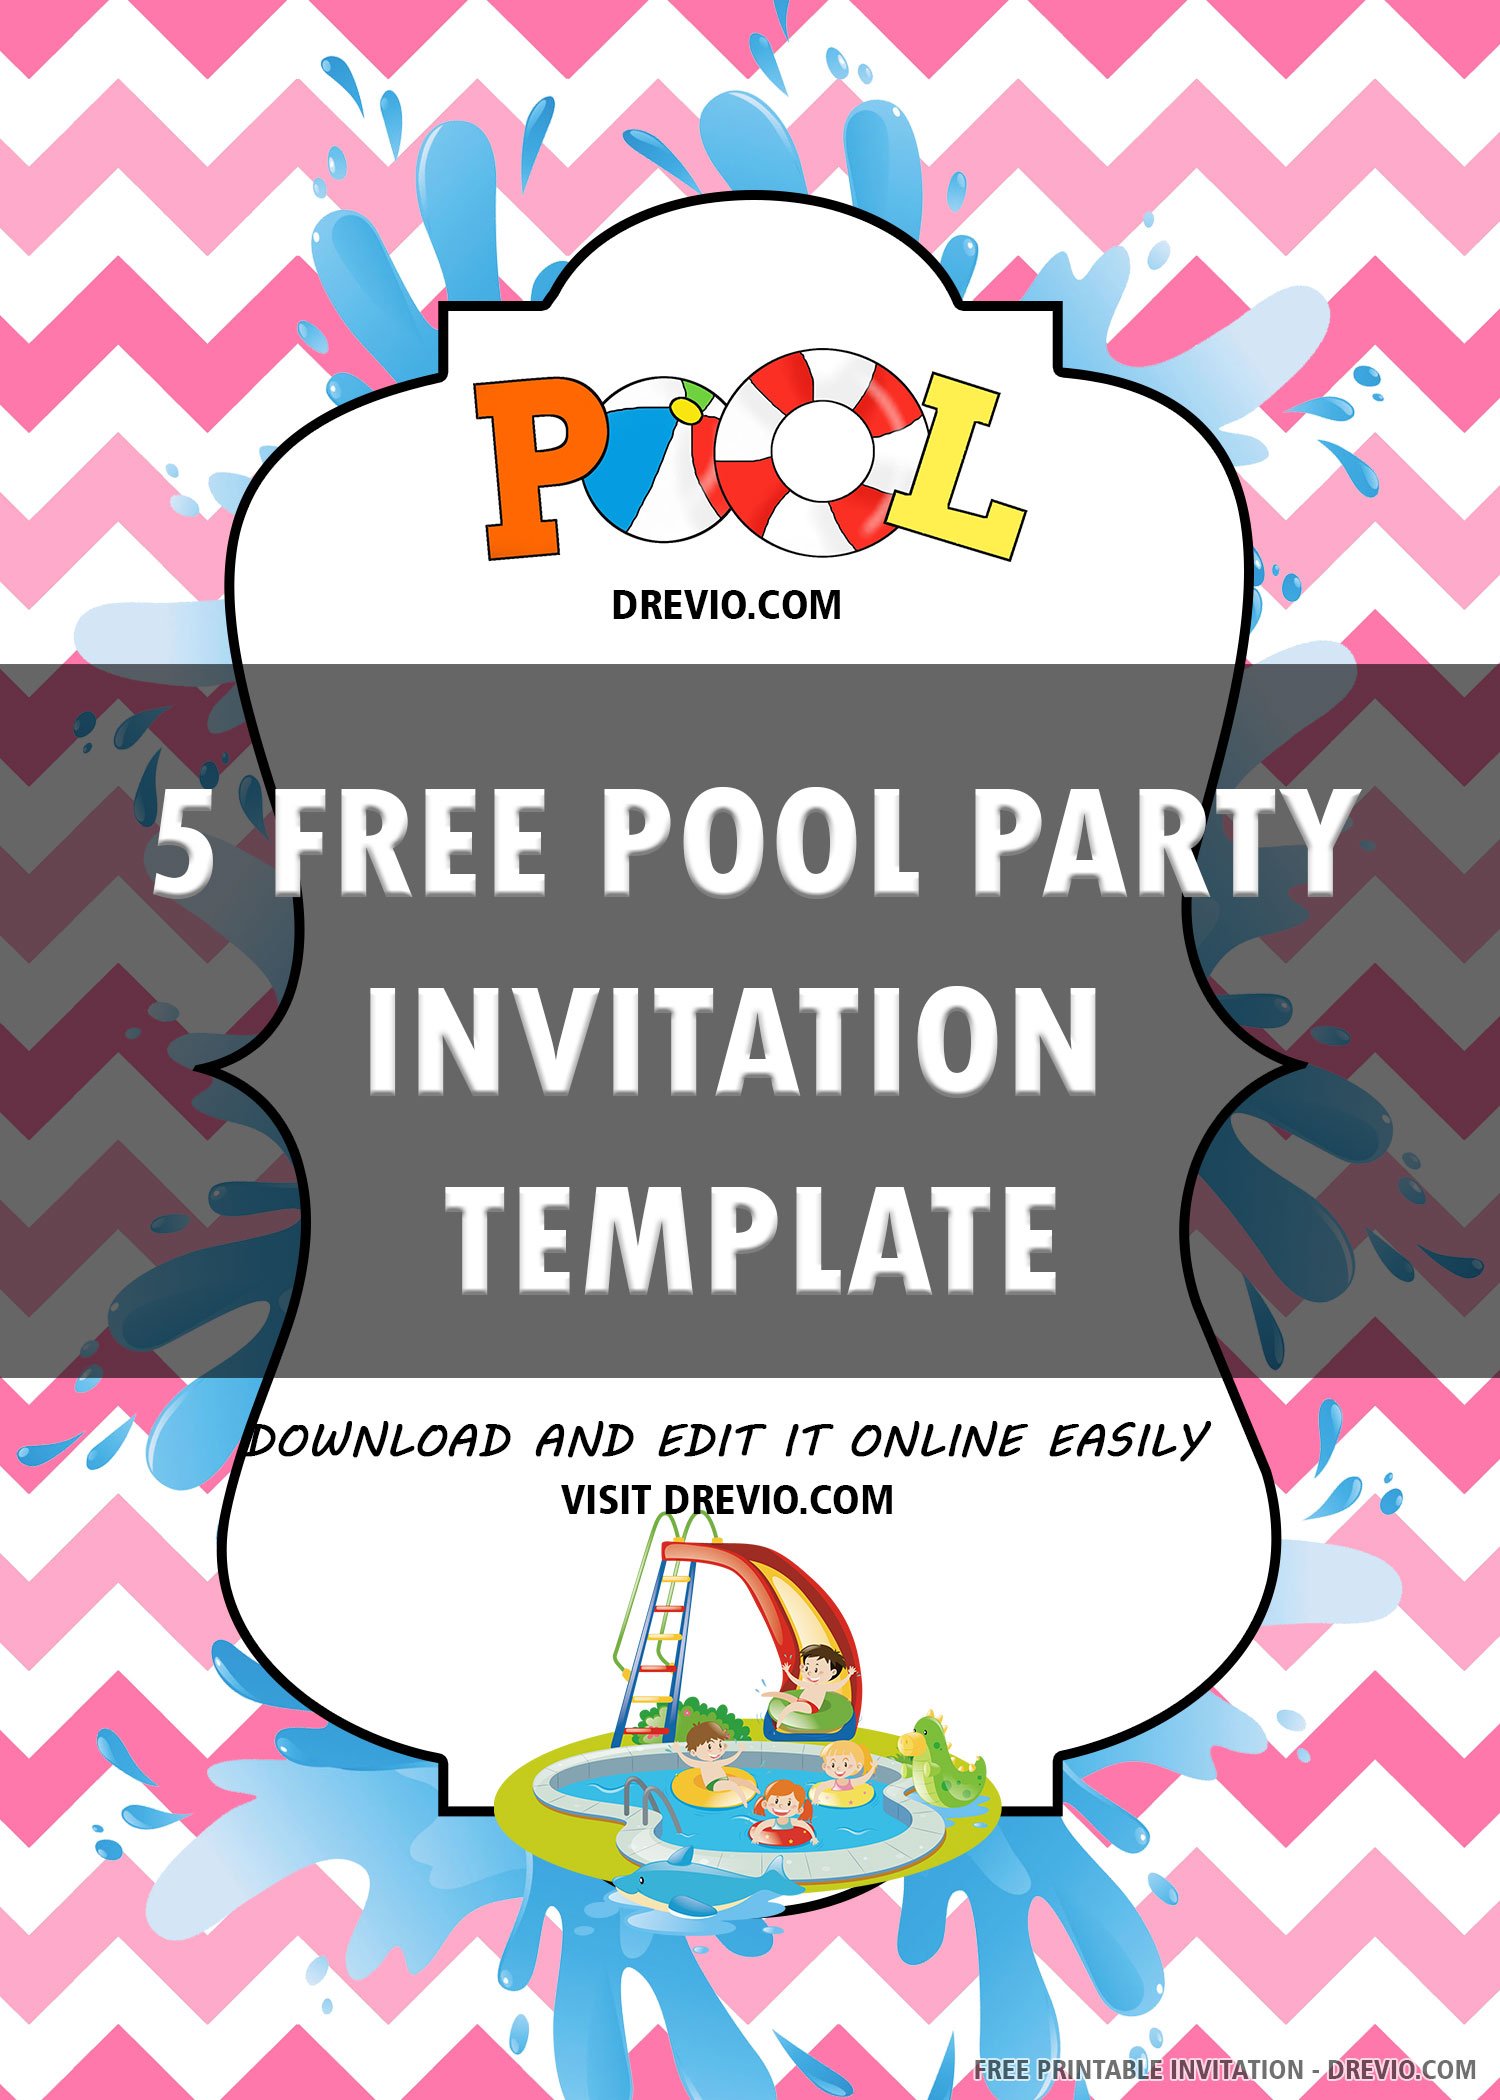 Free Printable Pool Party Invitation Templates  Download Hundreds With Regard To Free Pool Party Flyer Templates